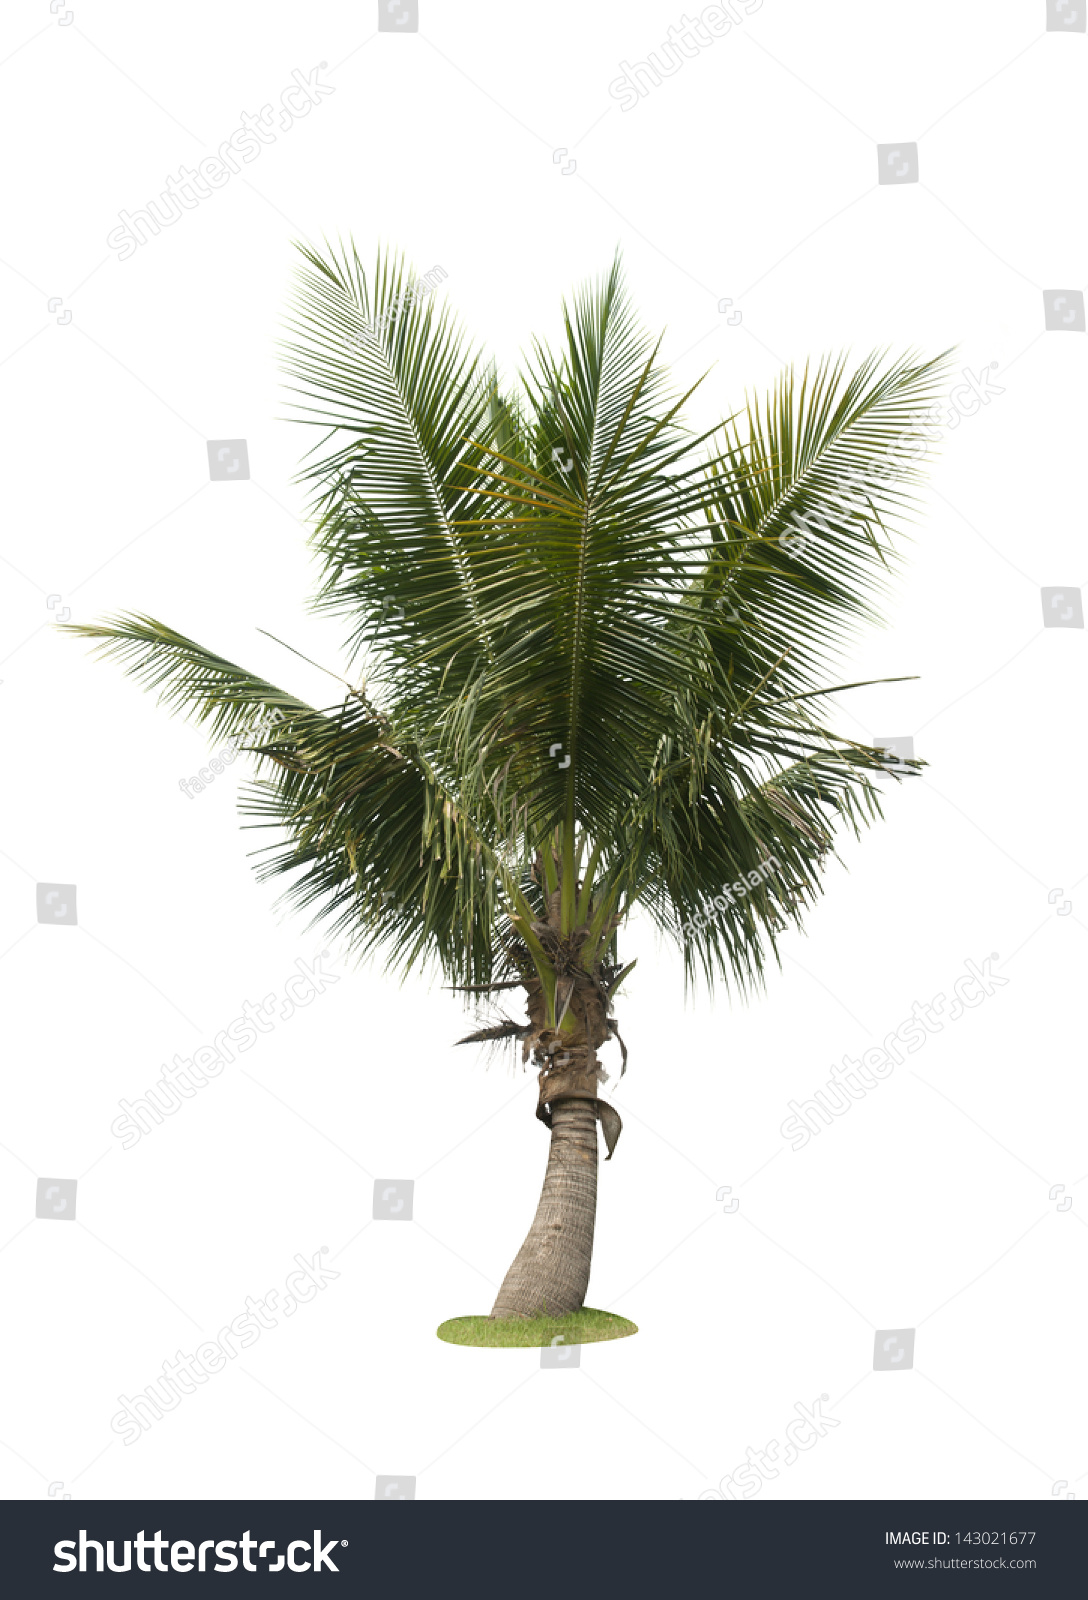 Trees Isolated Stock Photo 143021677 - Shutterstock